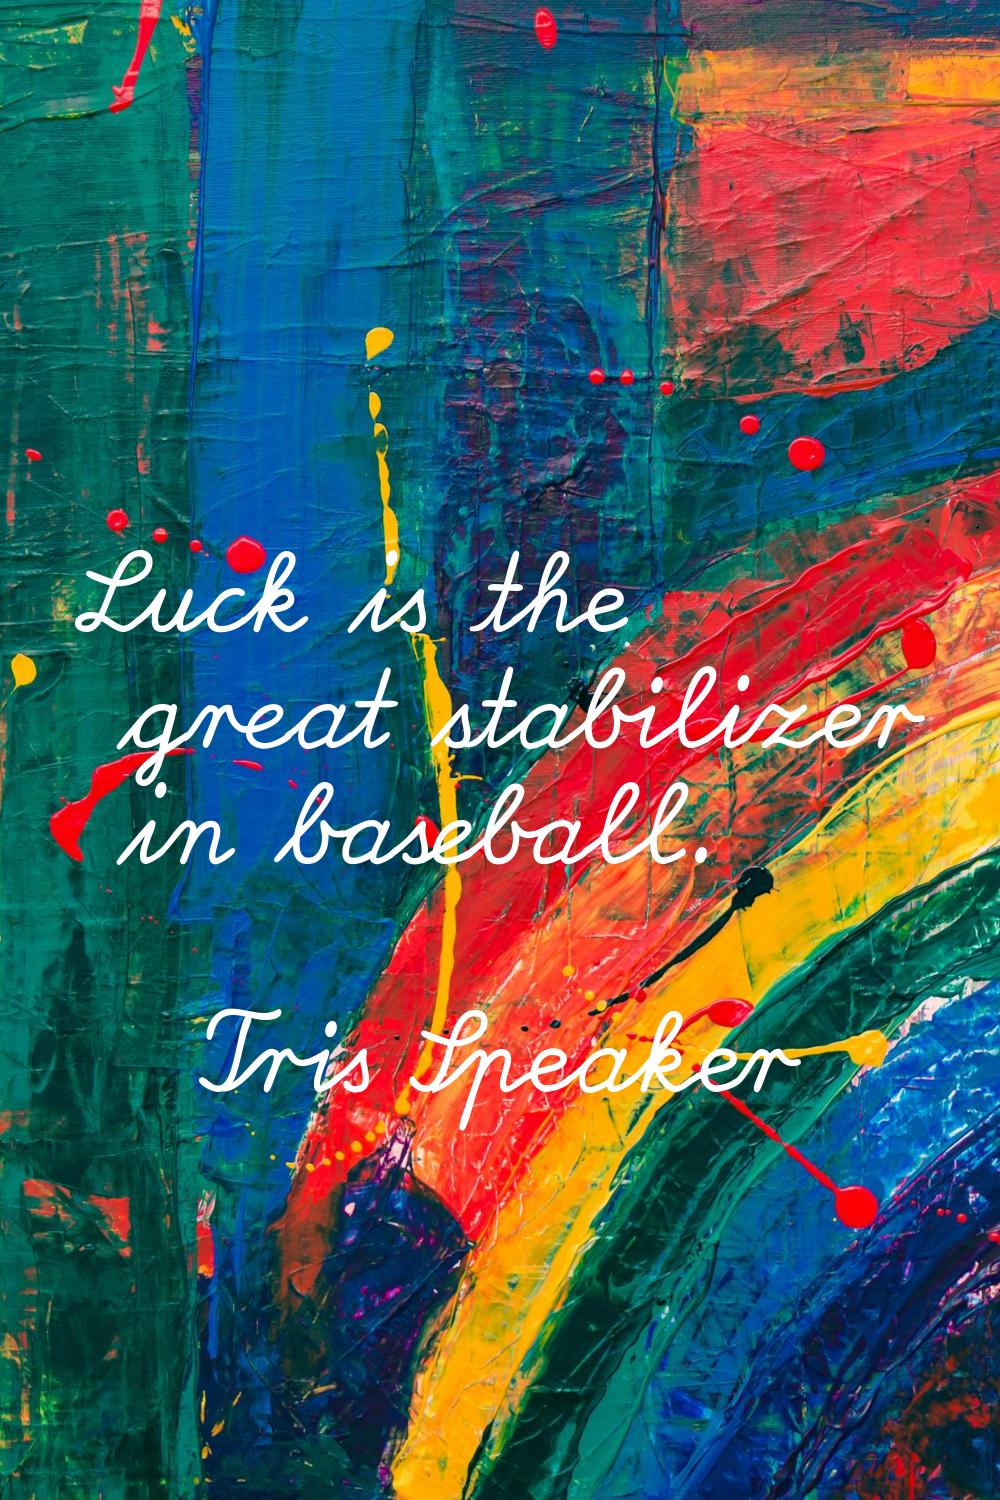 Luck is the great stabilizer in baseball.